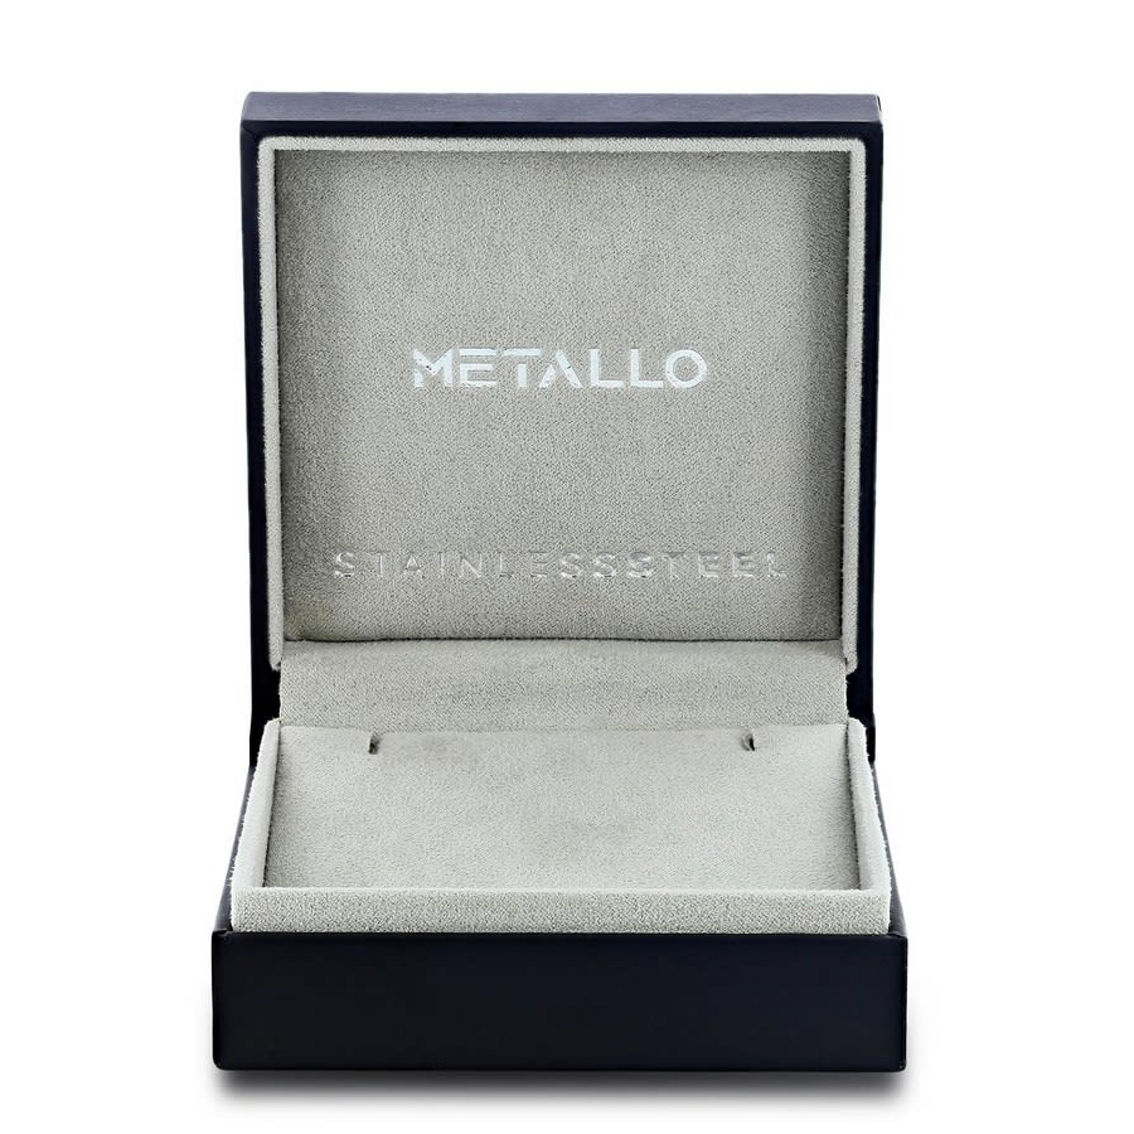 Metallo Stainless Steel Polished Cross Necklace - Image 2 of 3